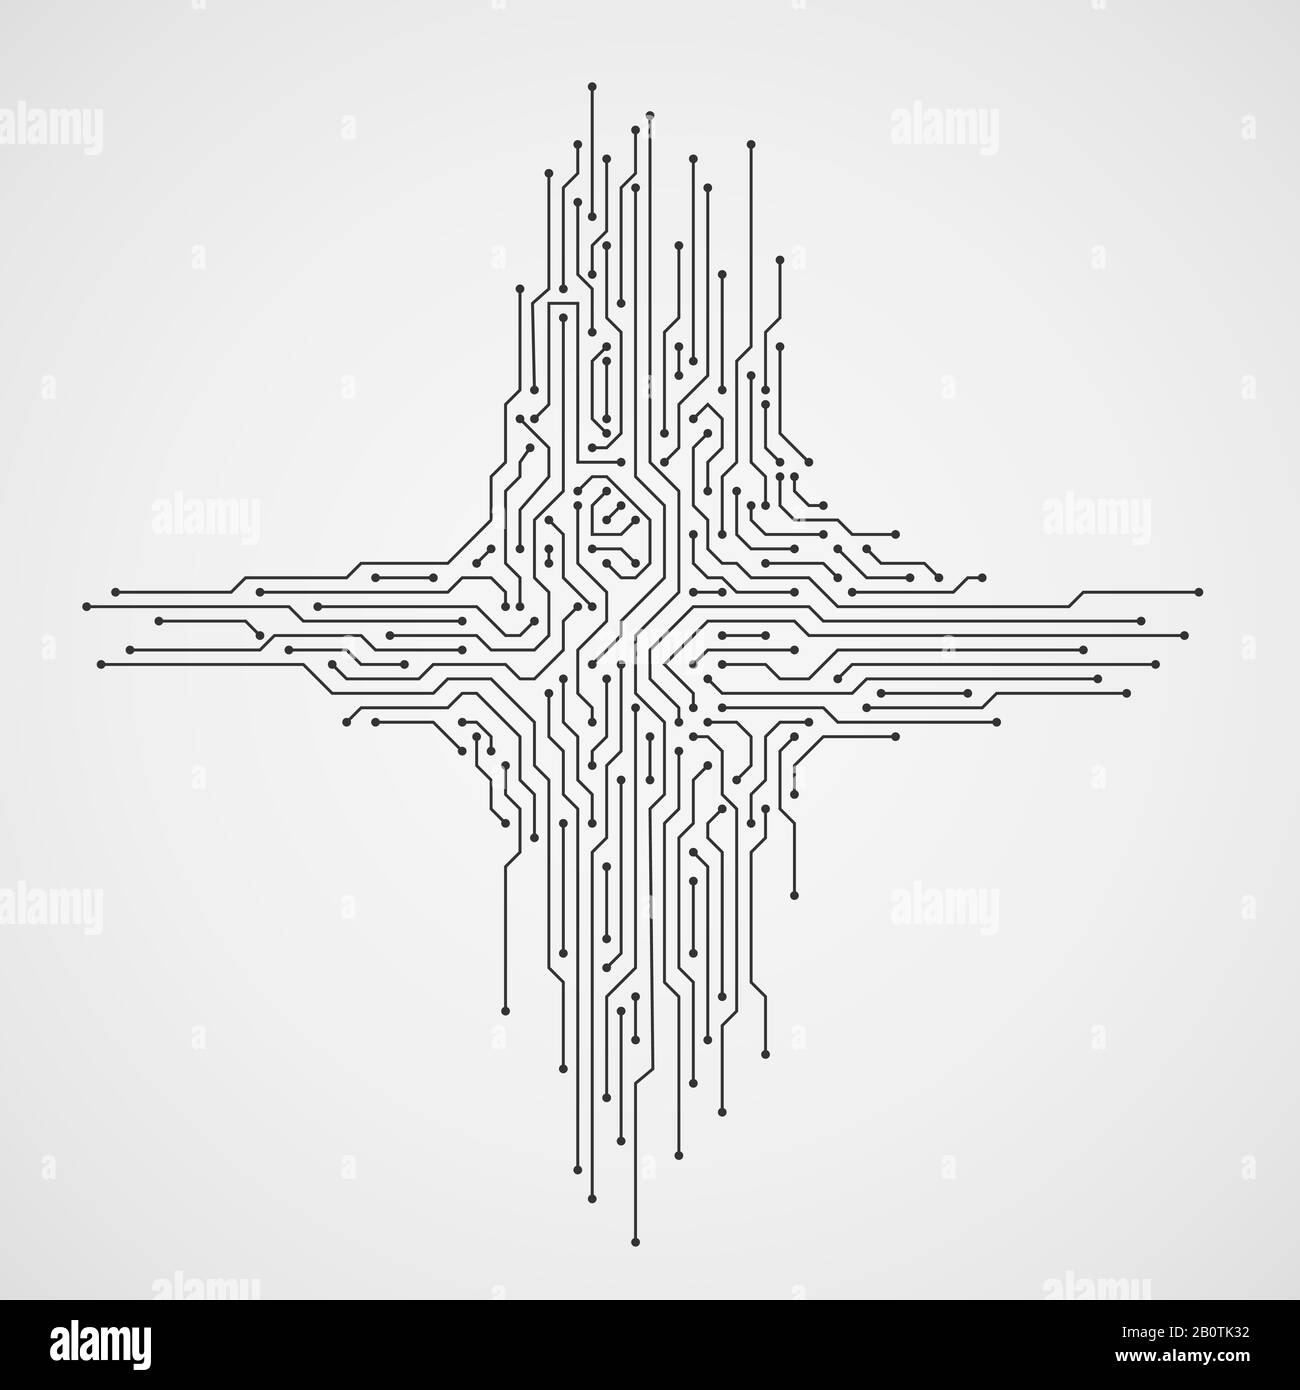 Digital engineering vector concept. Computer technology abstract background with circuit board. Electronic modern connect circuit board illustration Stock Vector